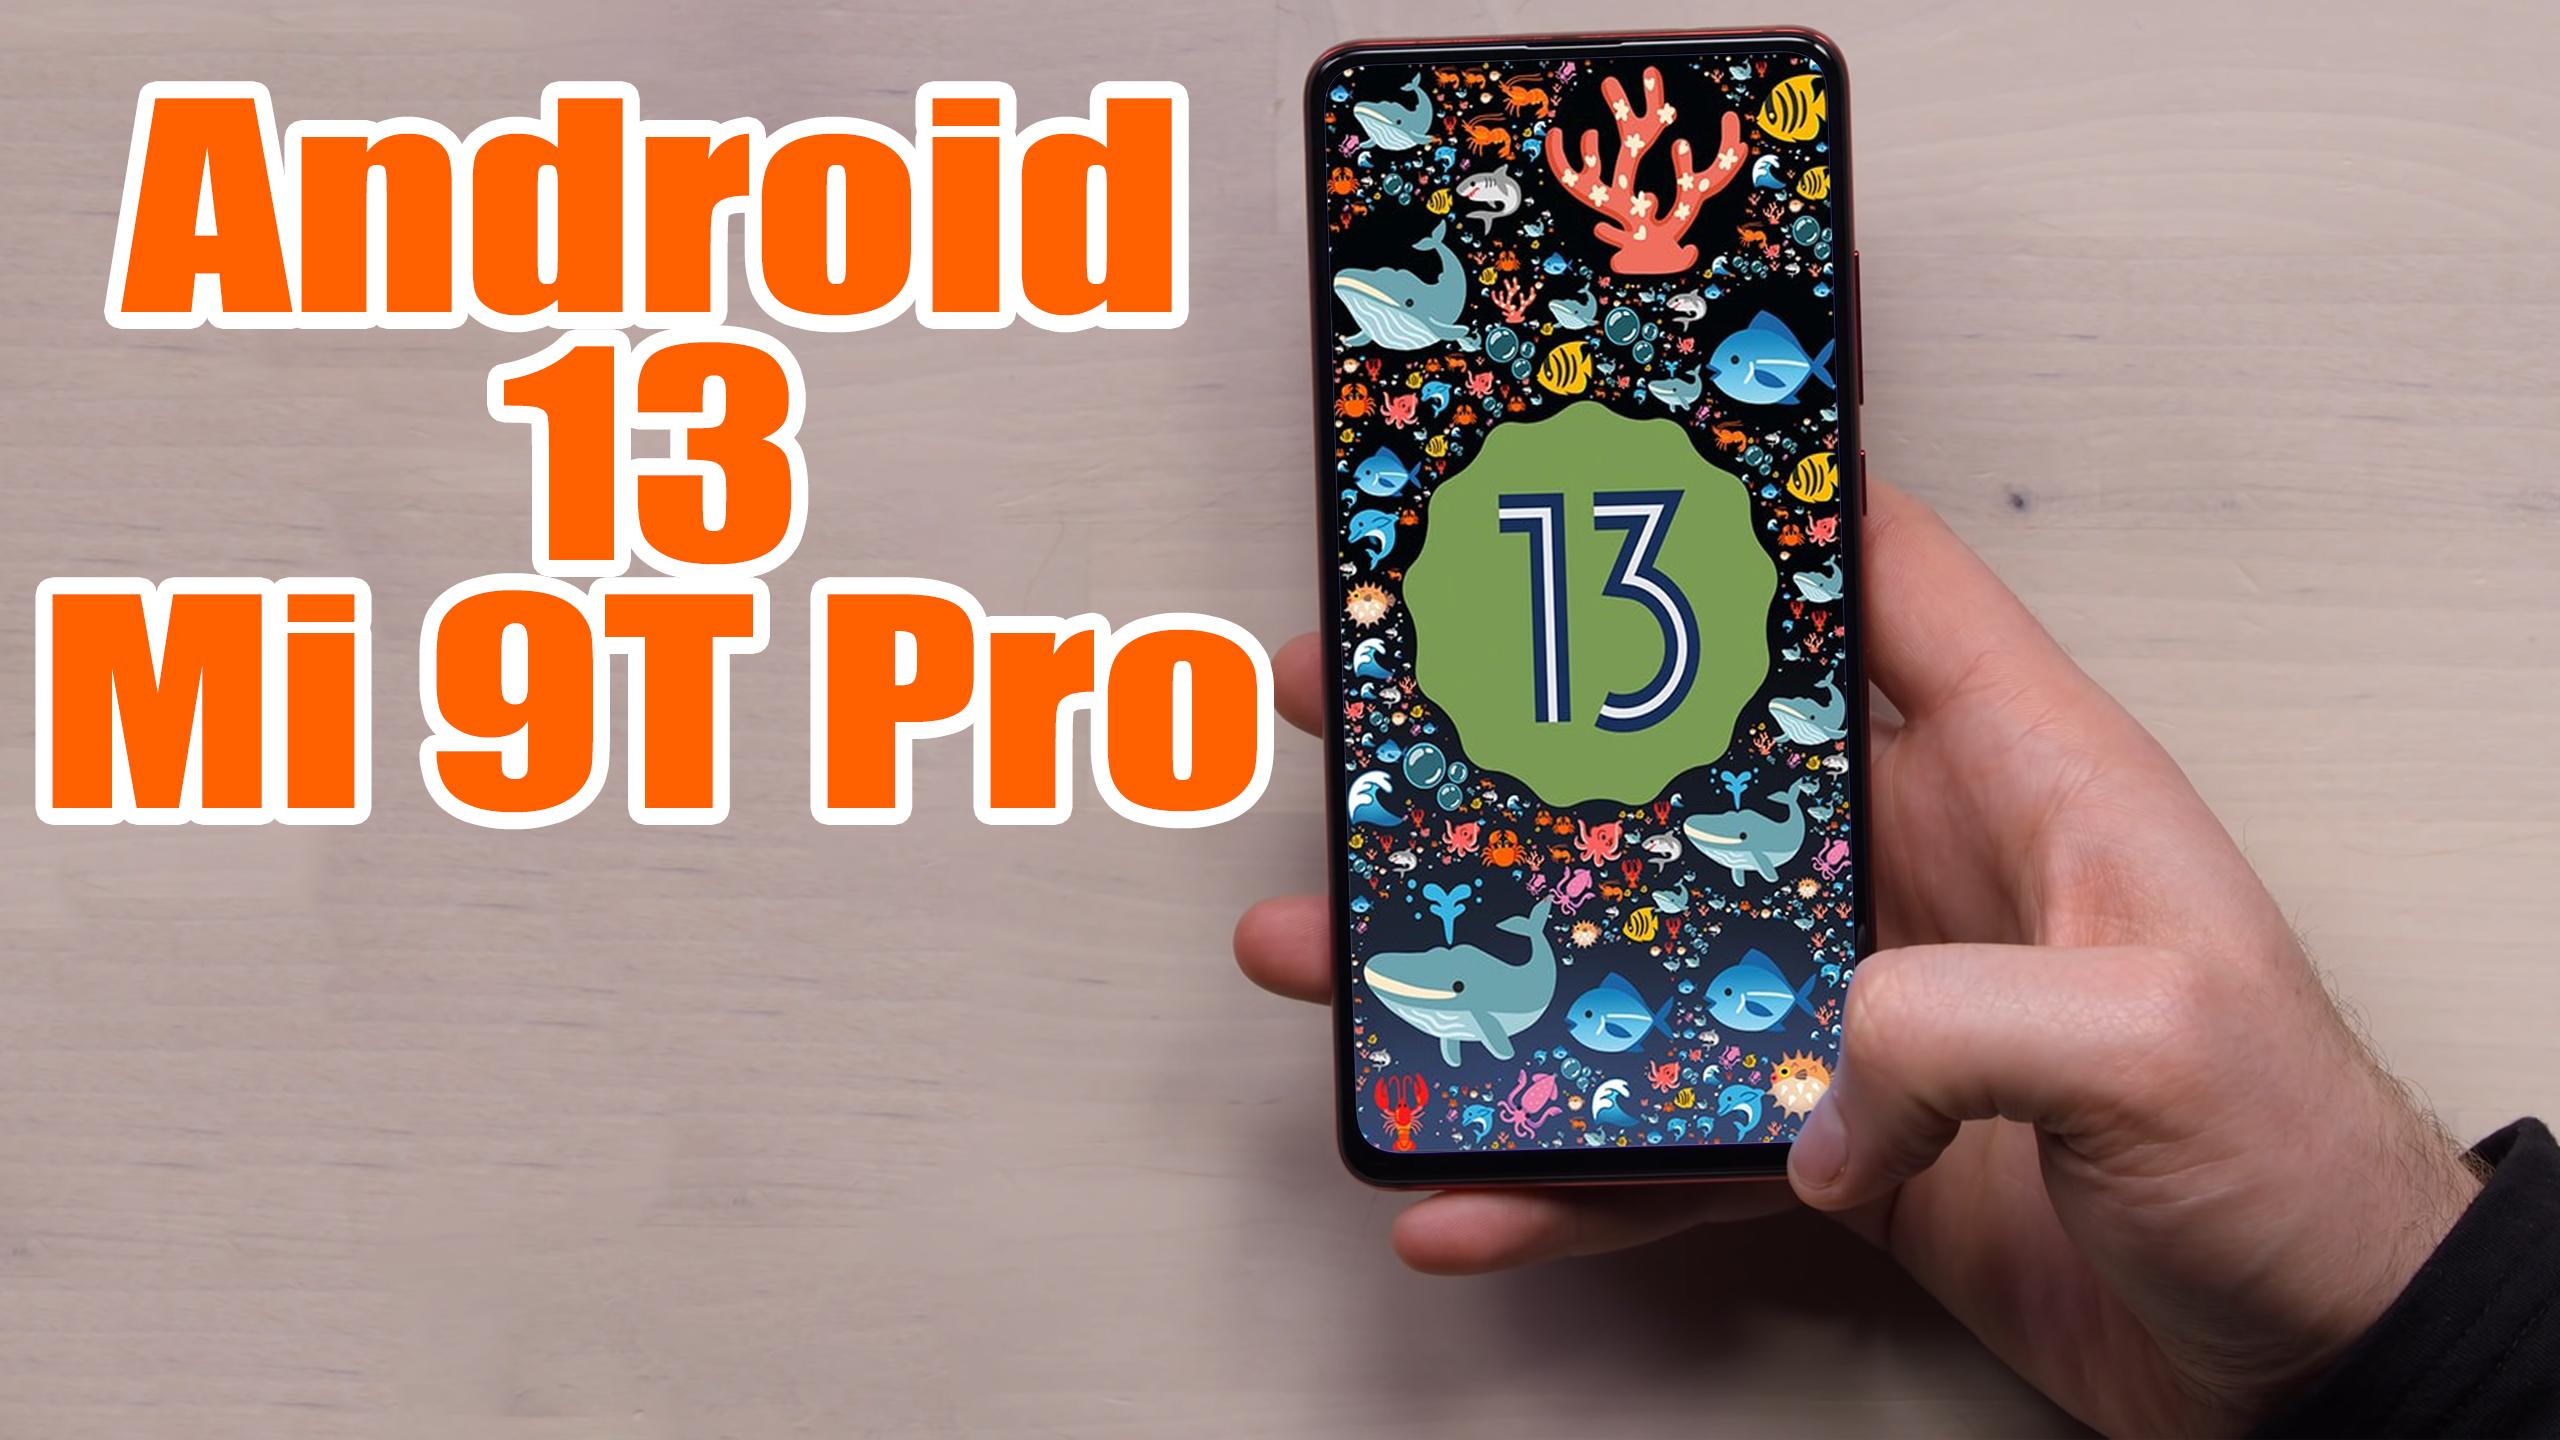 Install Android 13 On Redmi K20 Pro Mi 9t Pro Aosp Rom How To Guide The Upgrade Guide 5719